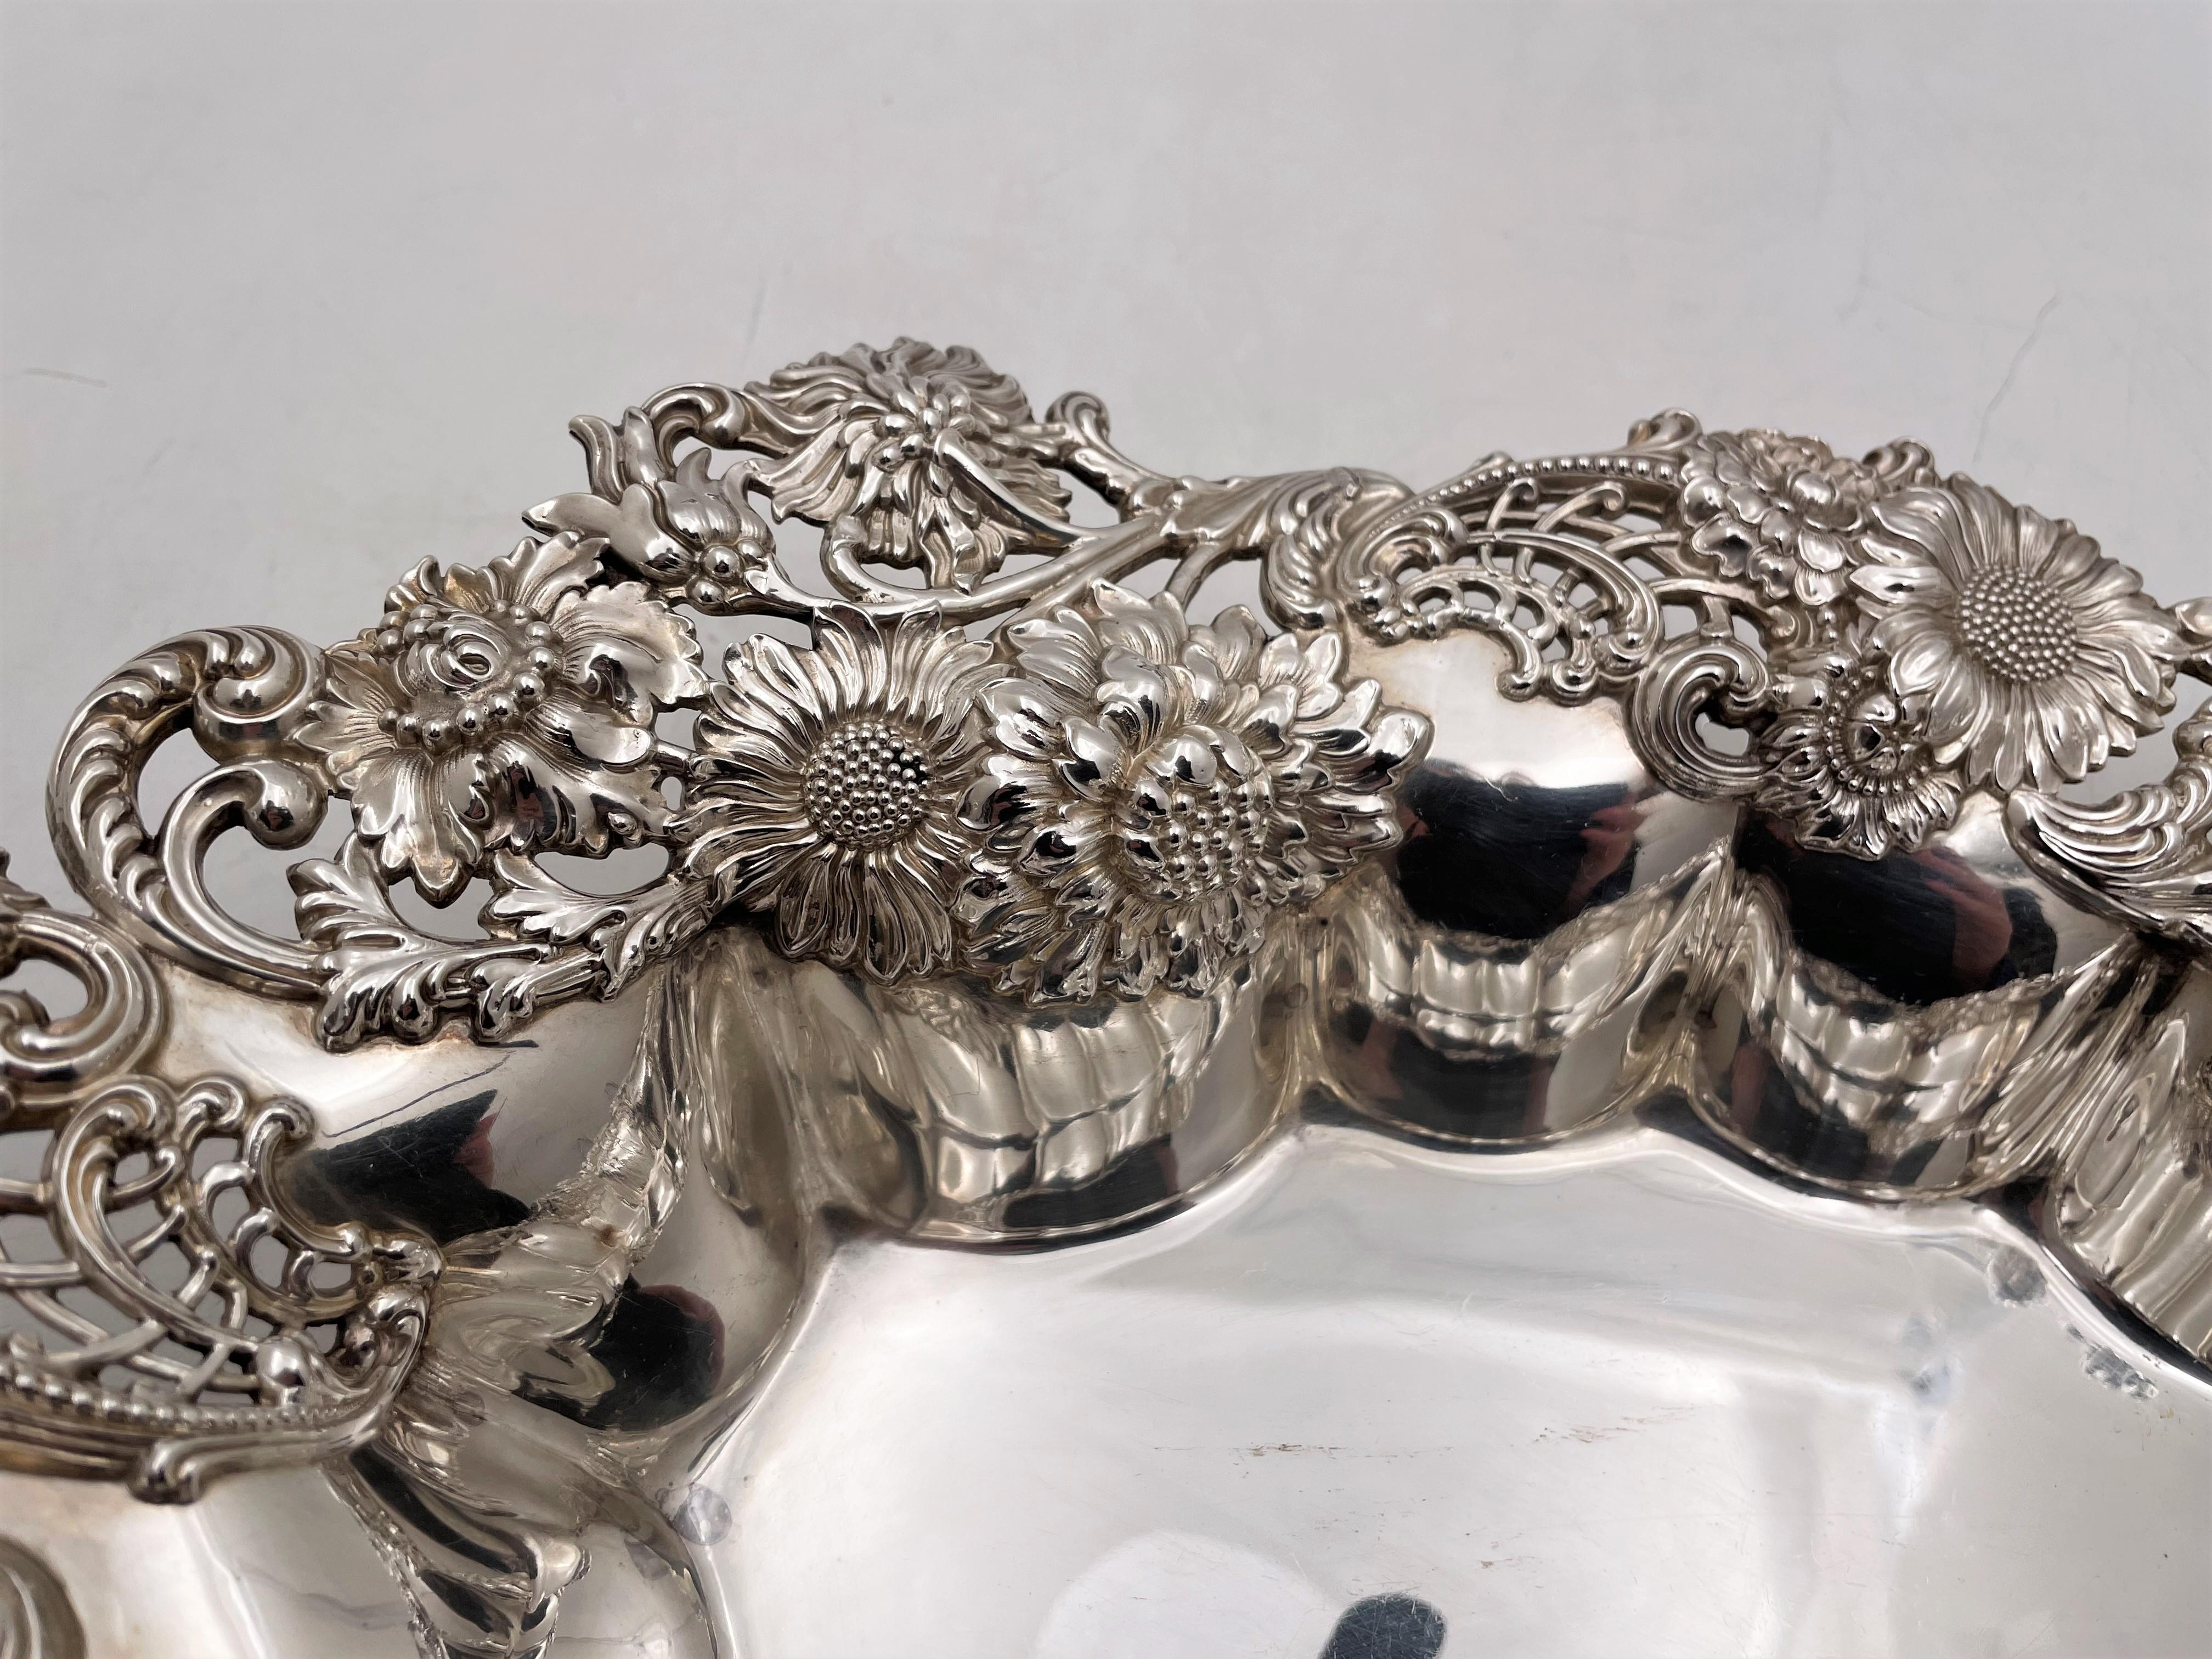 20th Century T. Starr Sterling Silver Centerpiece Bowl in Art Nouveau Style w/ Raised Daisies